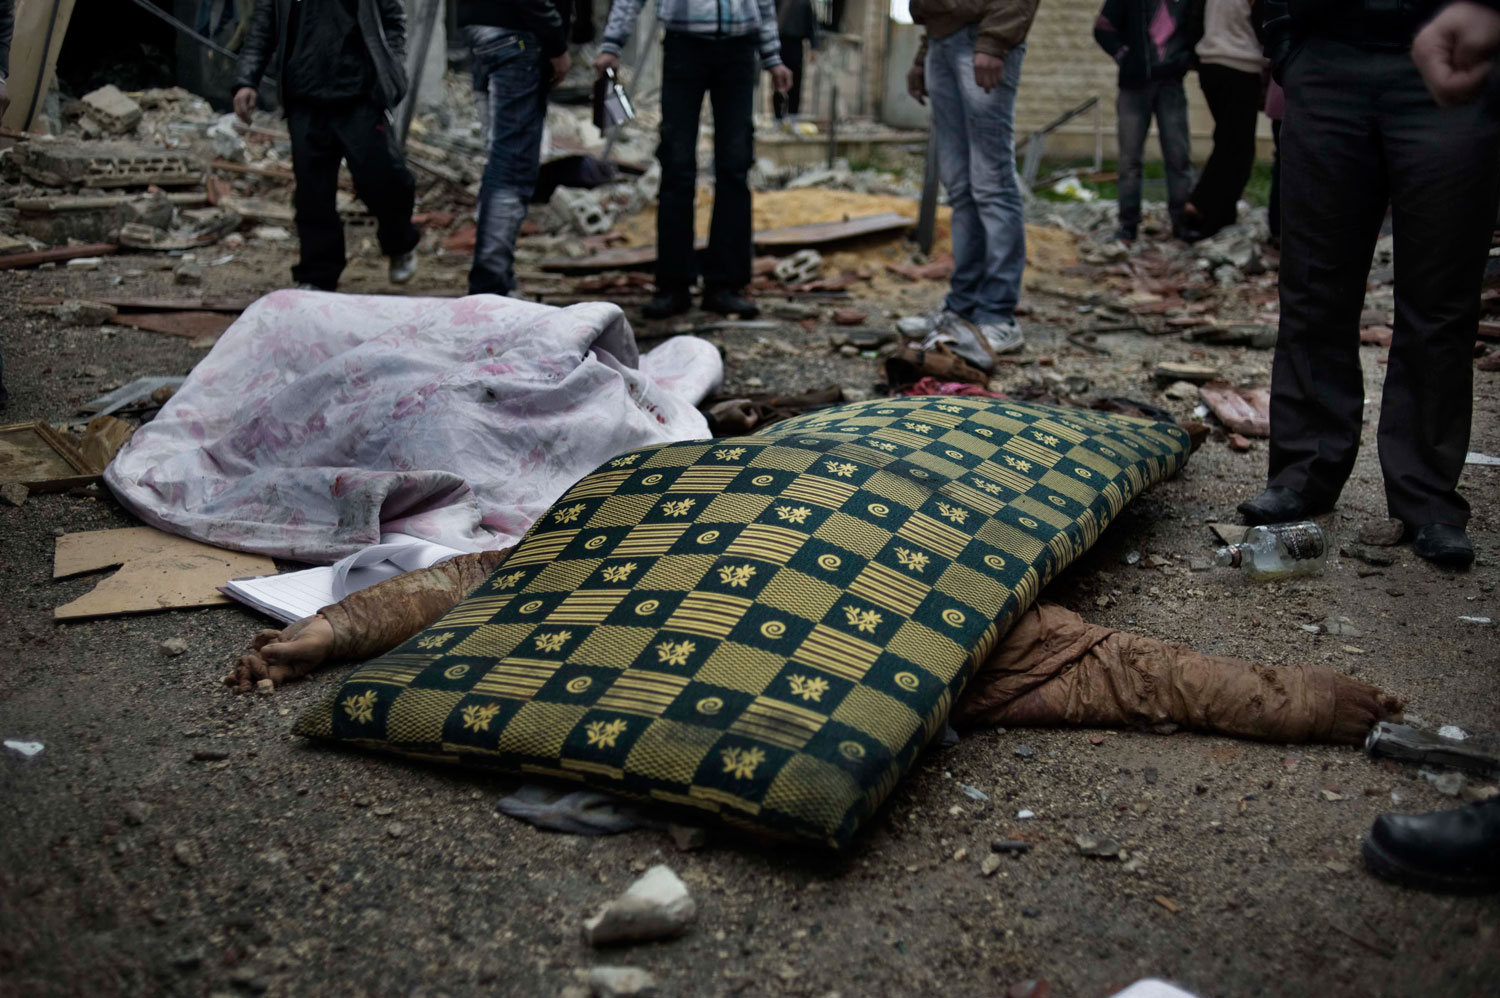 Feb. 10, 2012. The body of a Syrian police member lies on the ground in front of the former police station in al-Qsair. Eleven members of the Syrian police were killed.